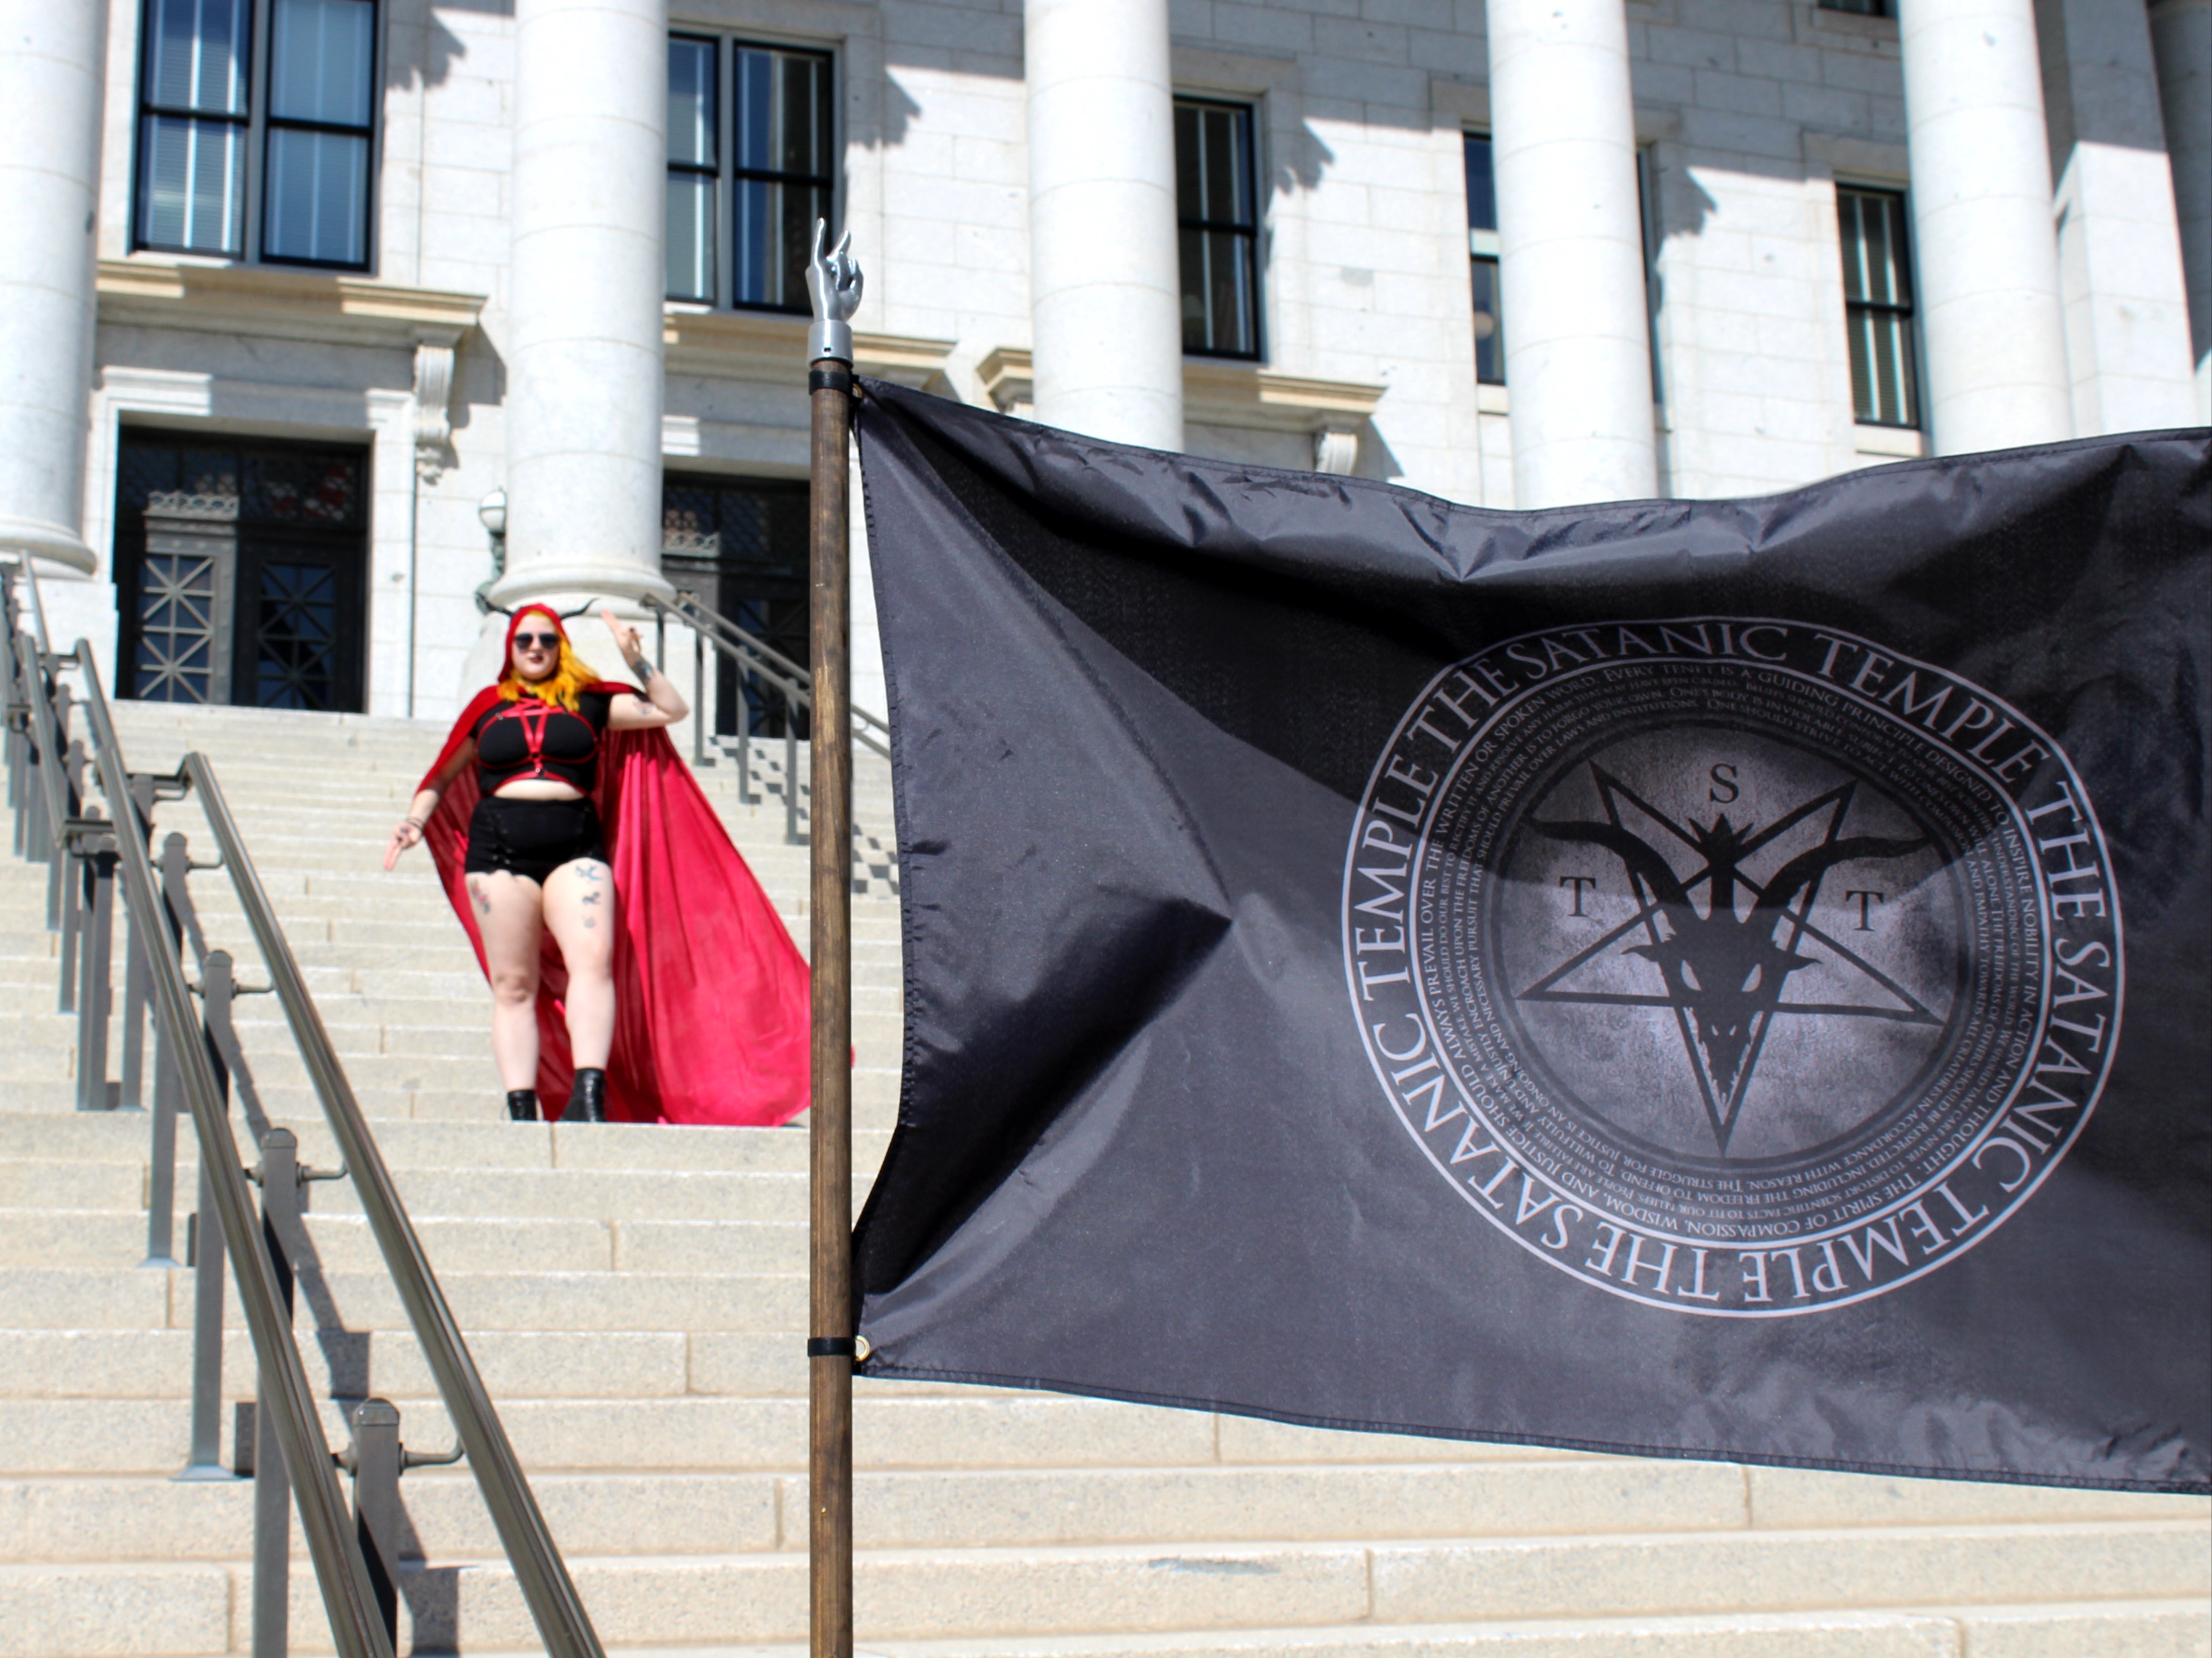 The Satanic Temple holds a reproductive freedom rally in Salt Lake City, Utah